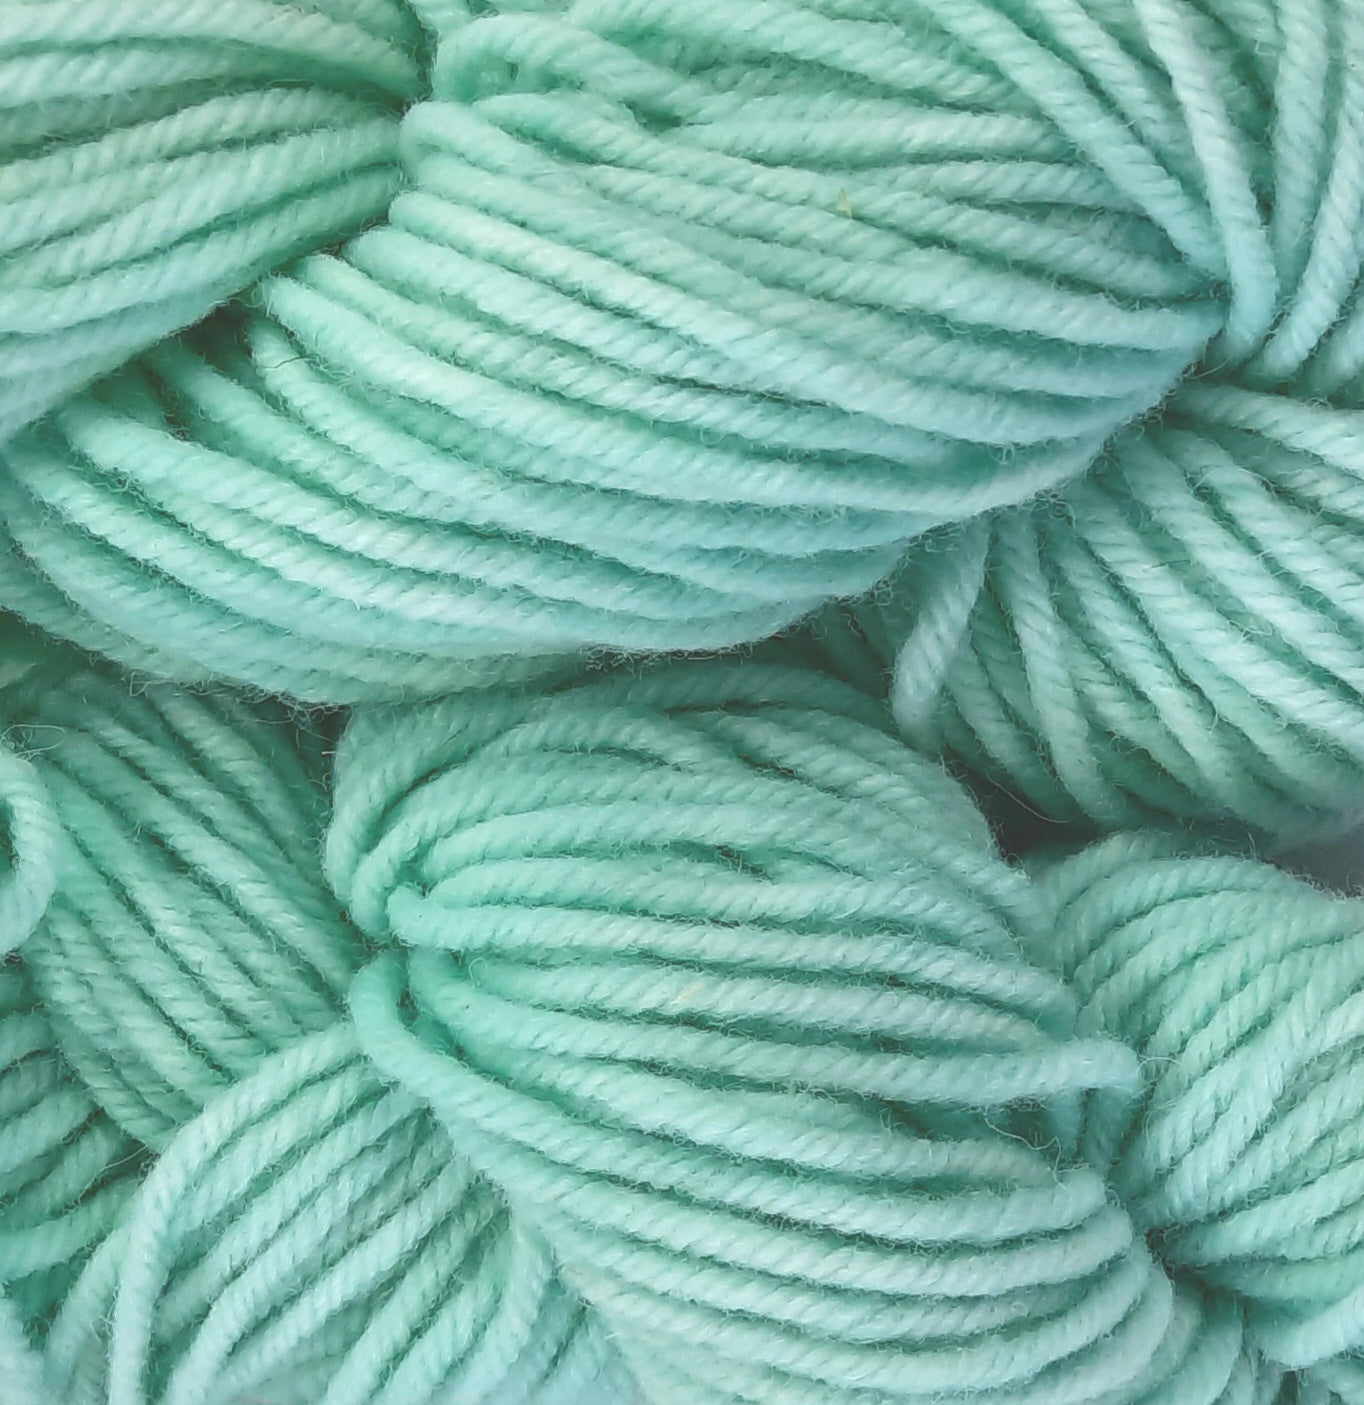 New! Hand-Dyed Super Bulky  (4 ply) Yarn - Mint